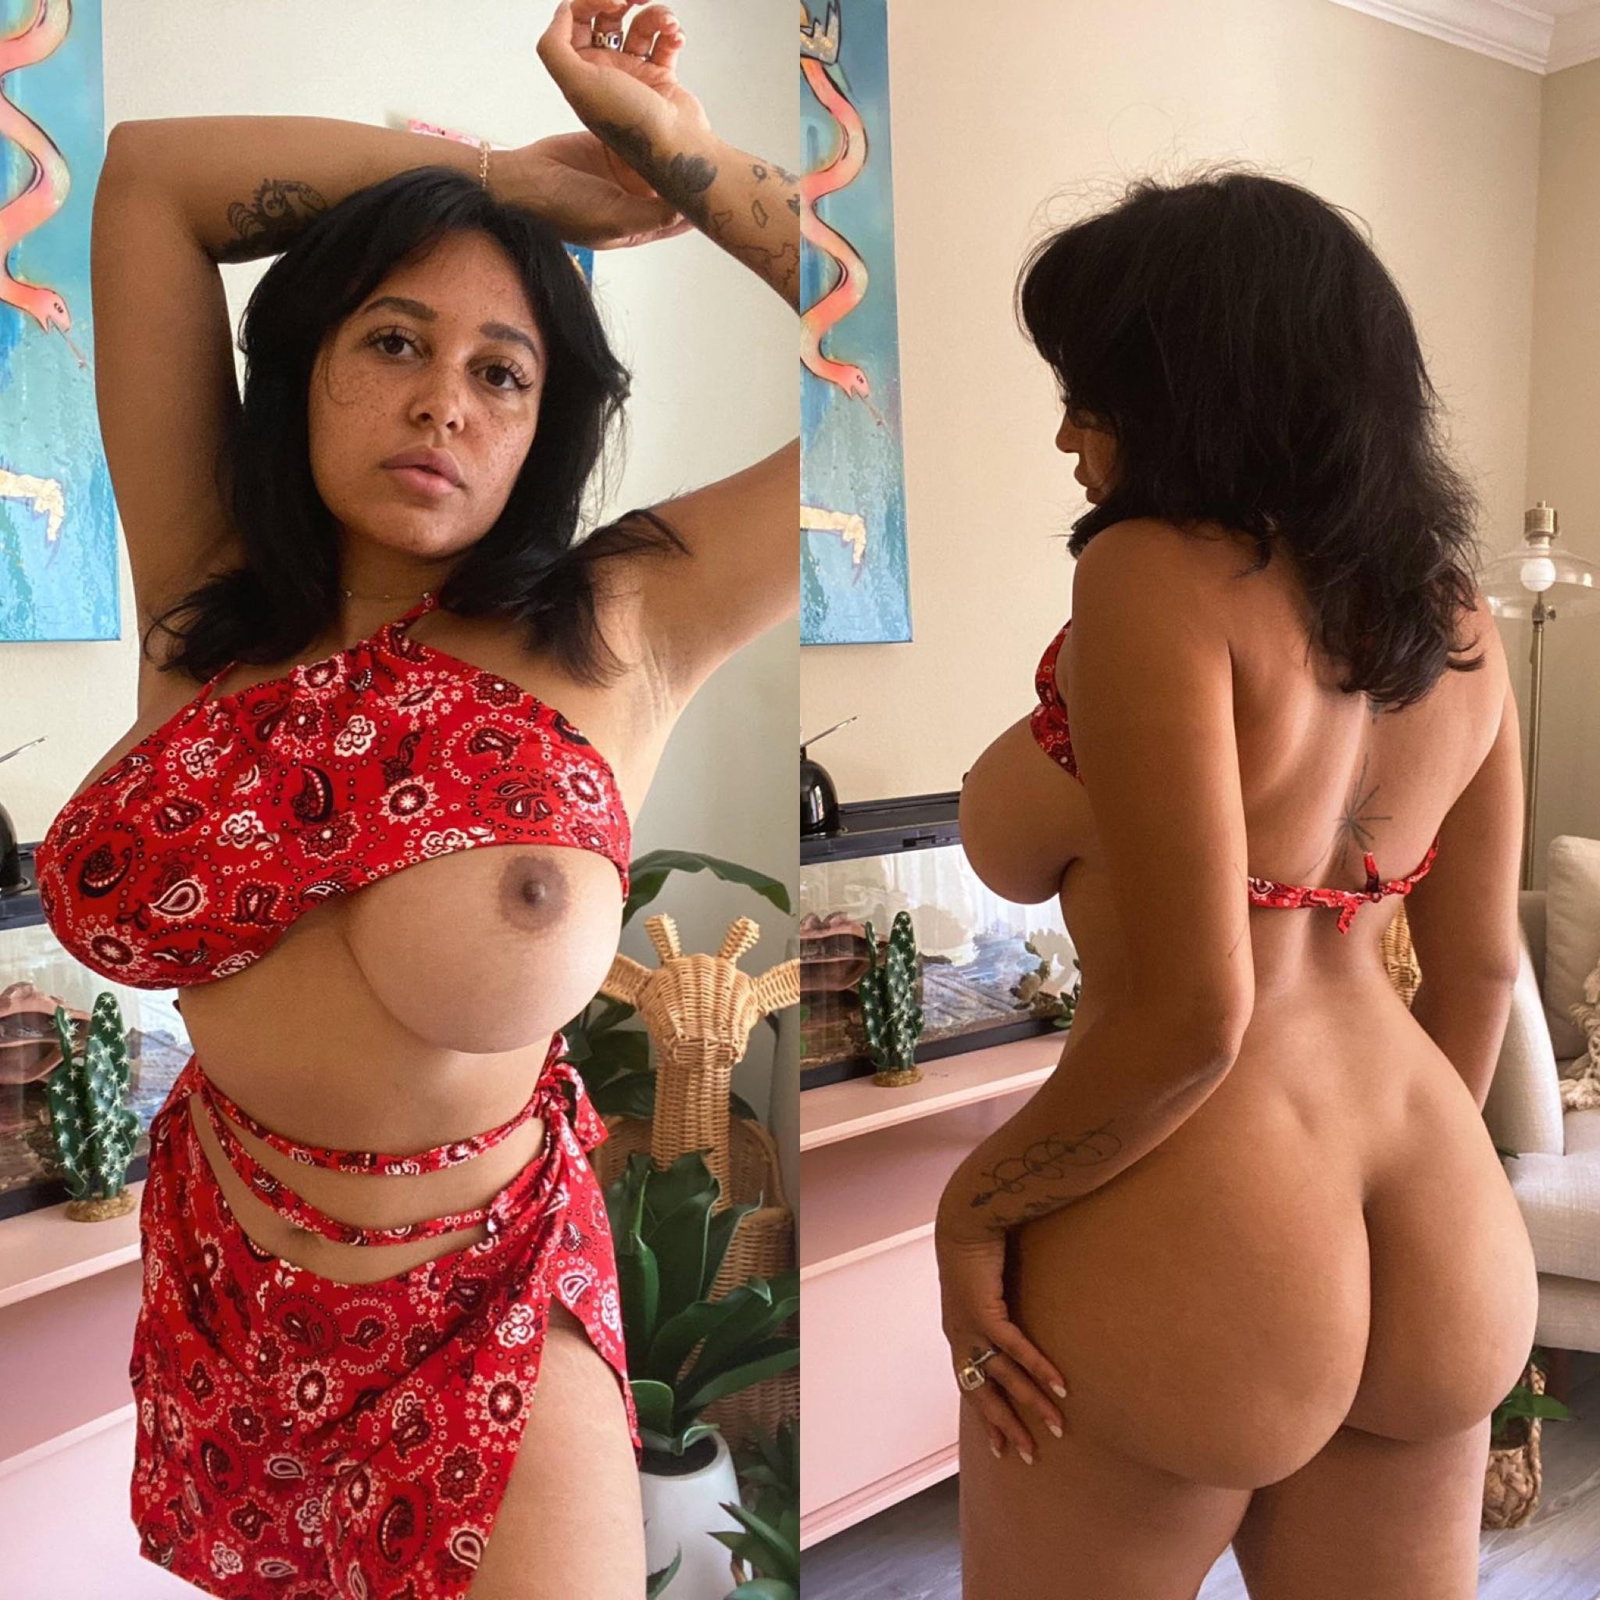 Photo by maxis735 with the username @maxis735,  May 31, 2022 at 7:46 PM. The post is about the topic India and the text says '#bigboobs #bigtits #busty #bigass #pov #milf #beauty #amateur #naturalboobs #onoff #beforeafter #dressedundressed'